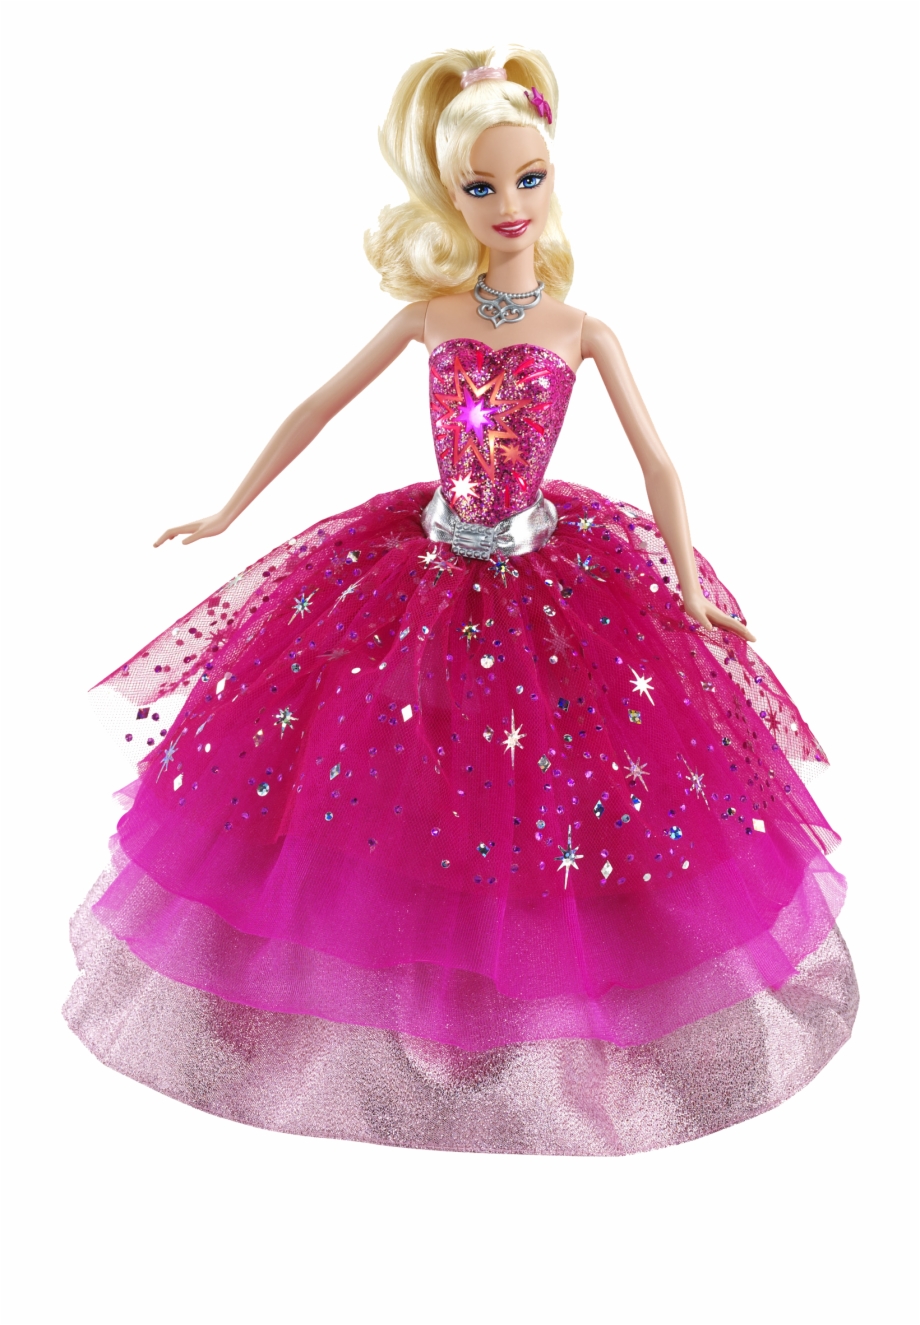 Barbie Doll Free Png Image